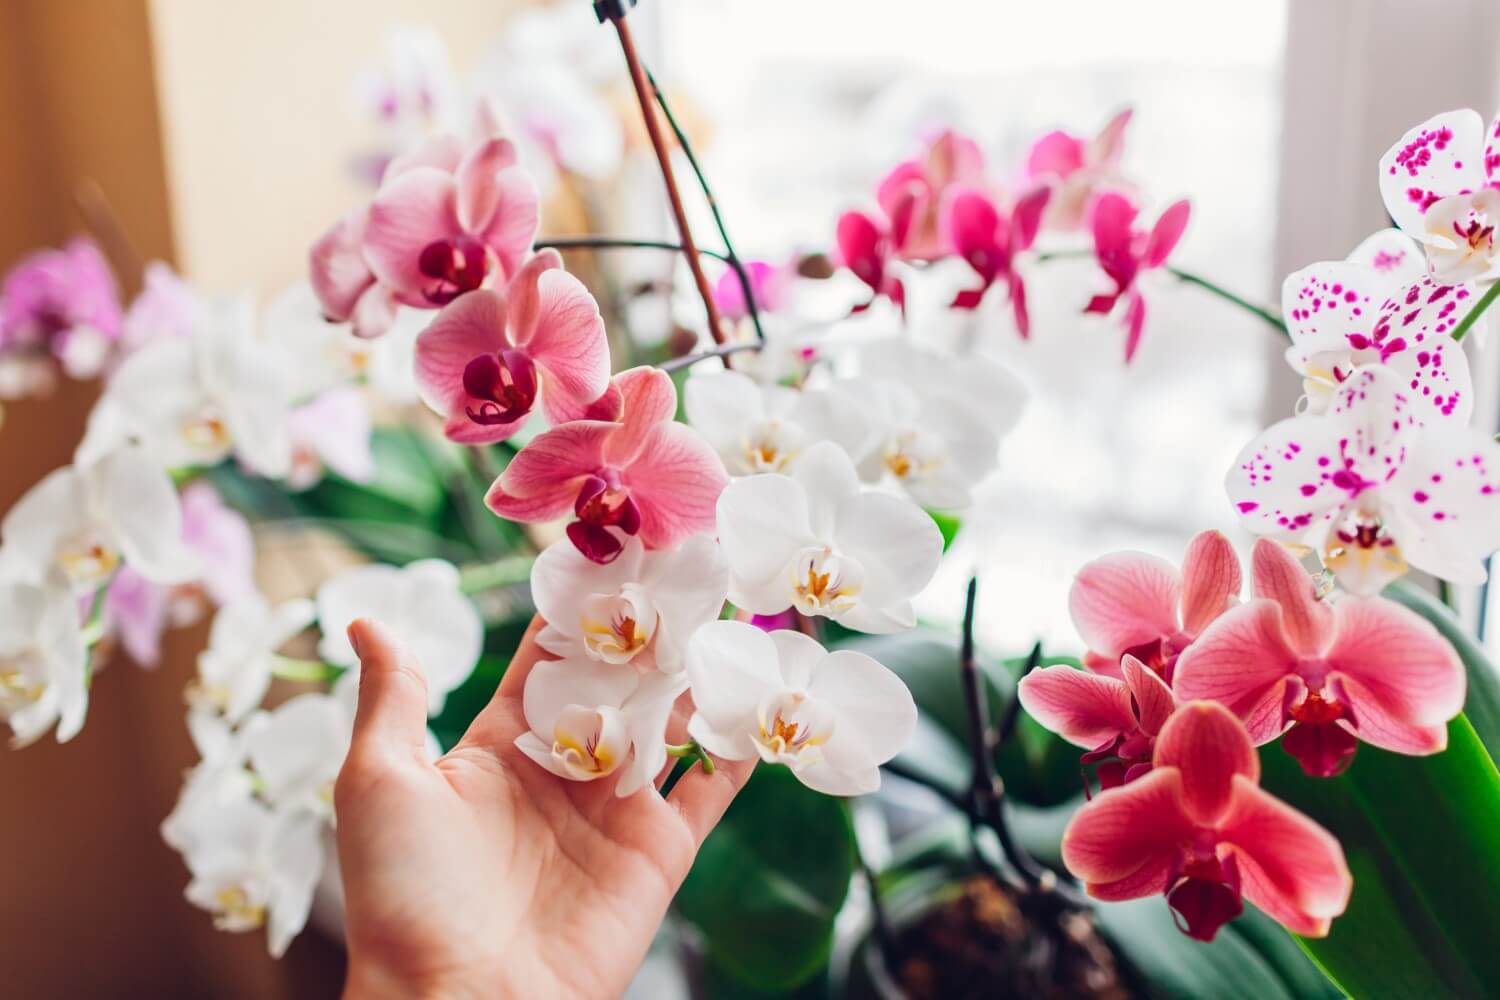 When to repot orchids